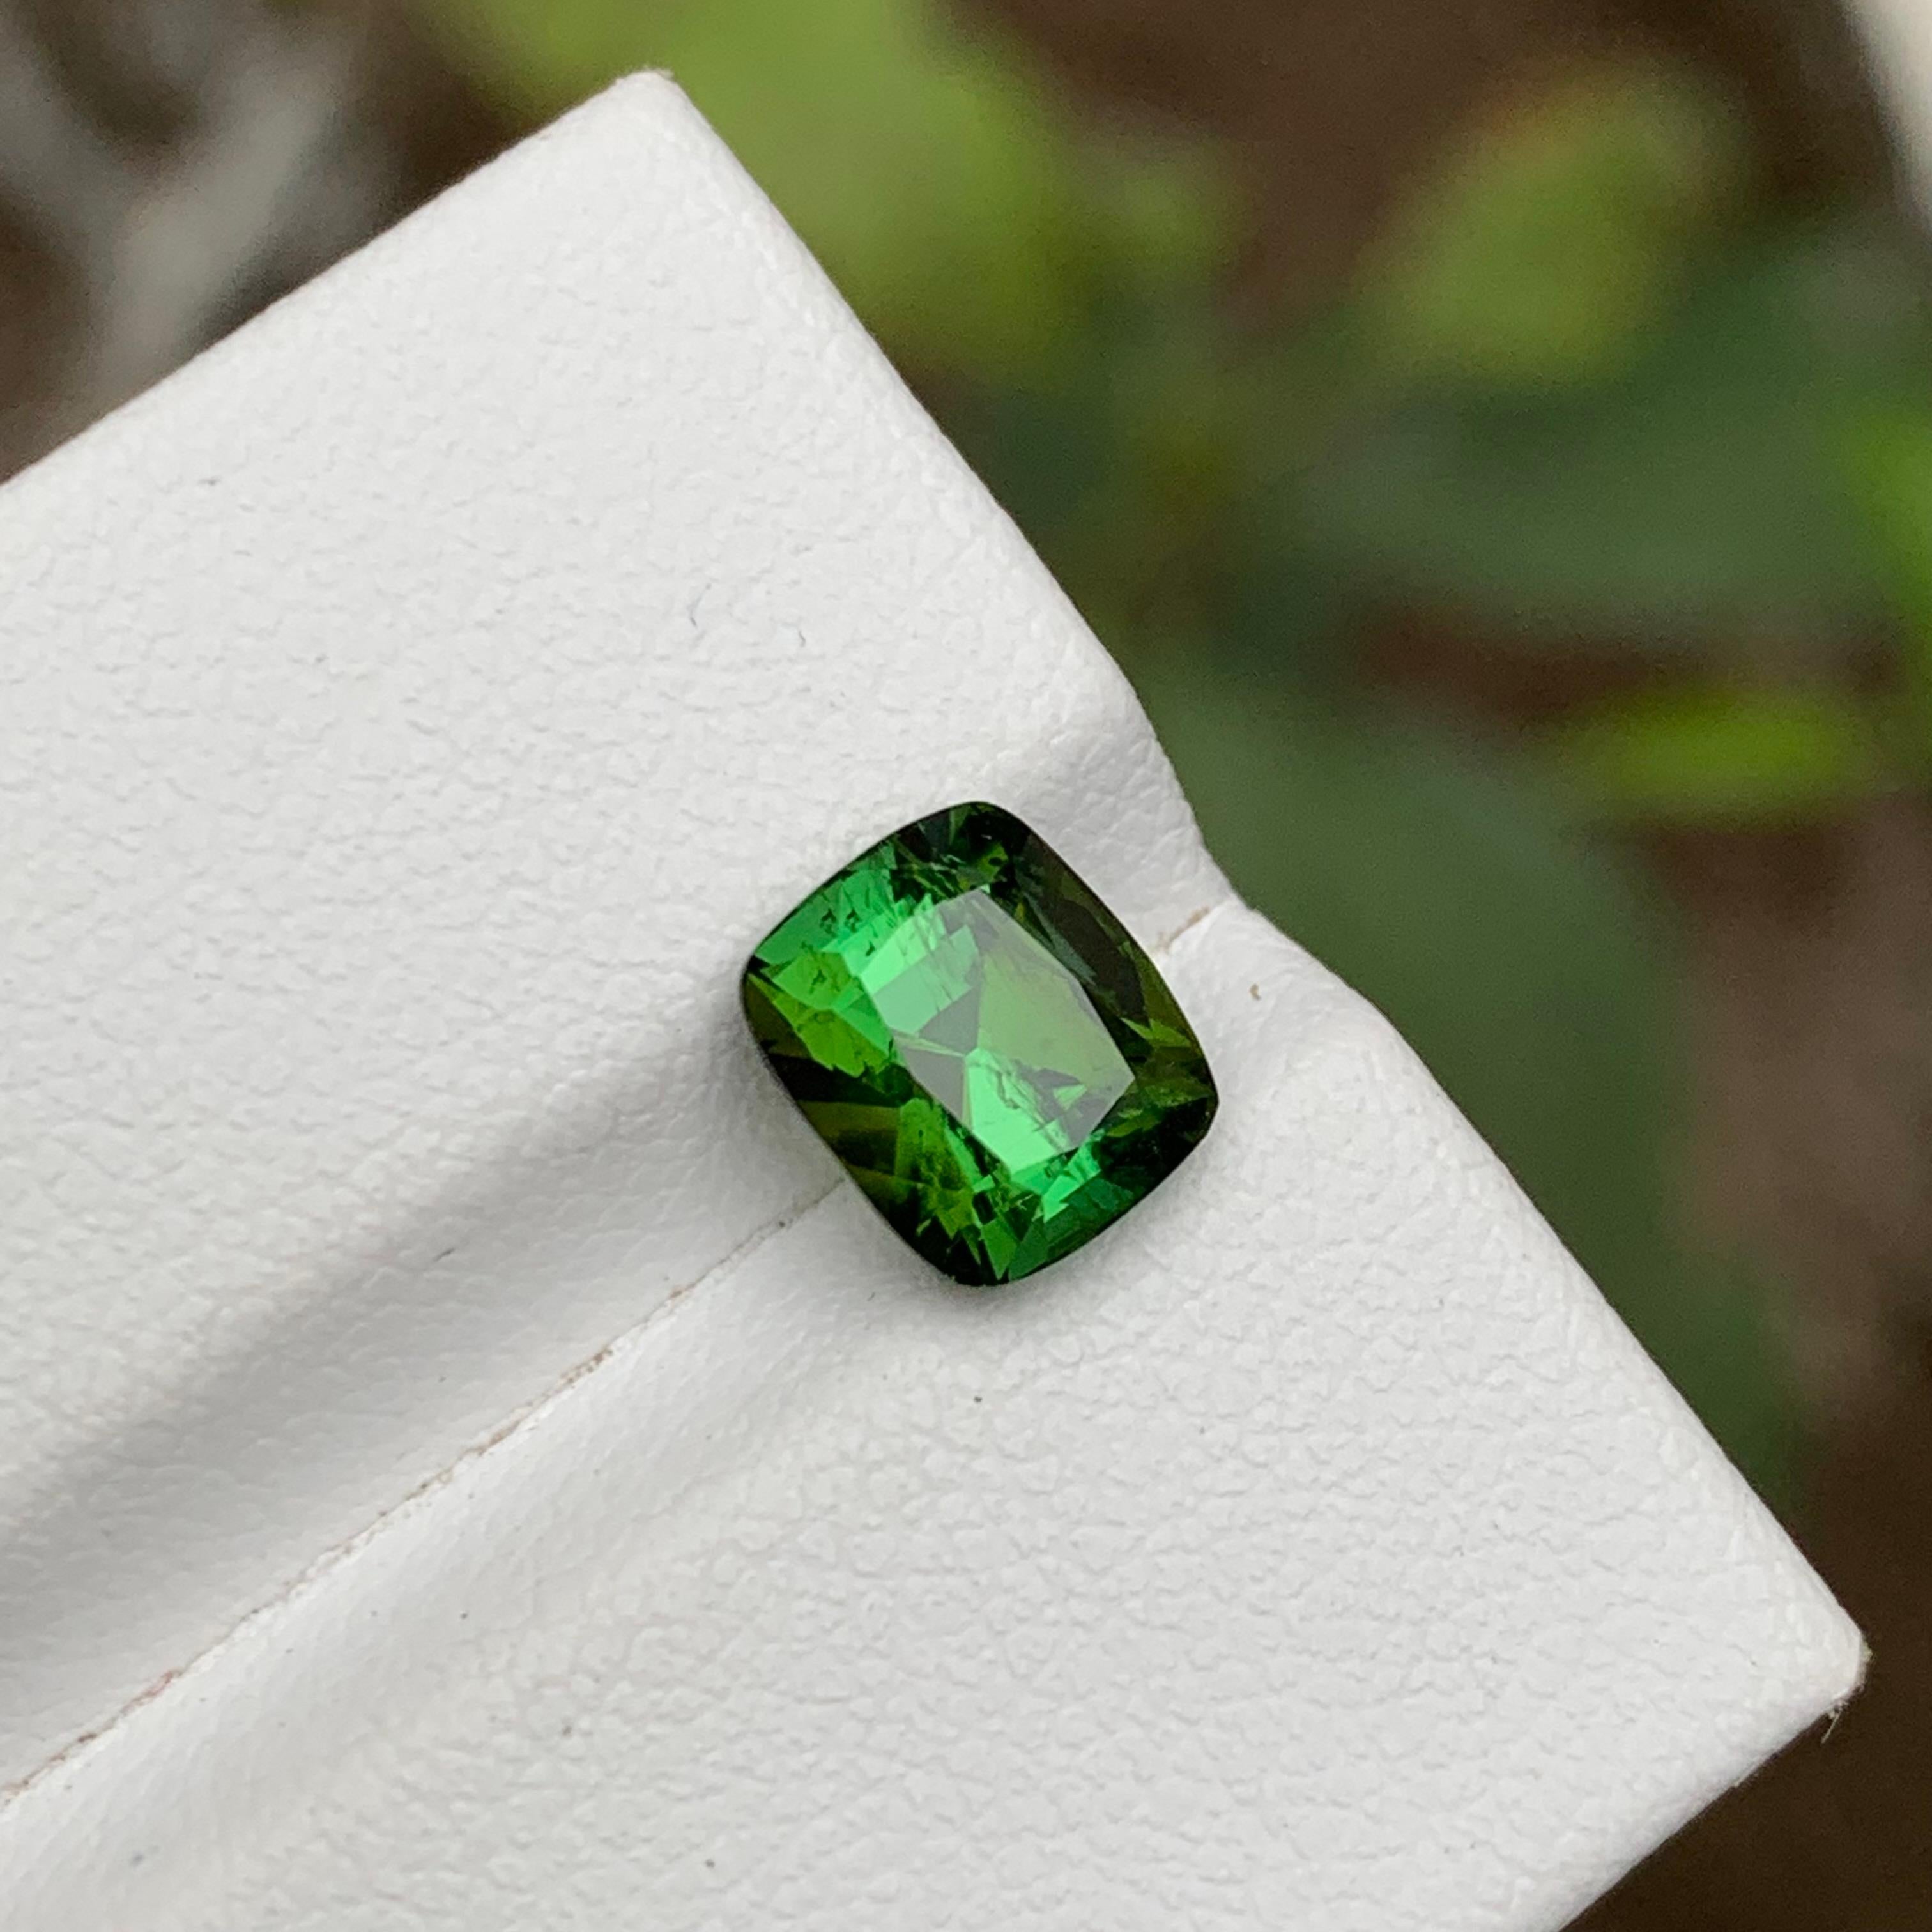 Rare Green Natural Tourmaline Loose Gemstone 2.10Ct Cushion Cut for Ring/Jewelry For Sale 8